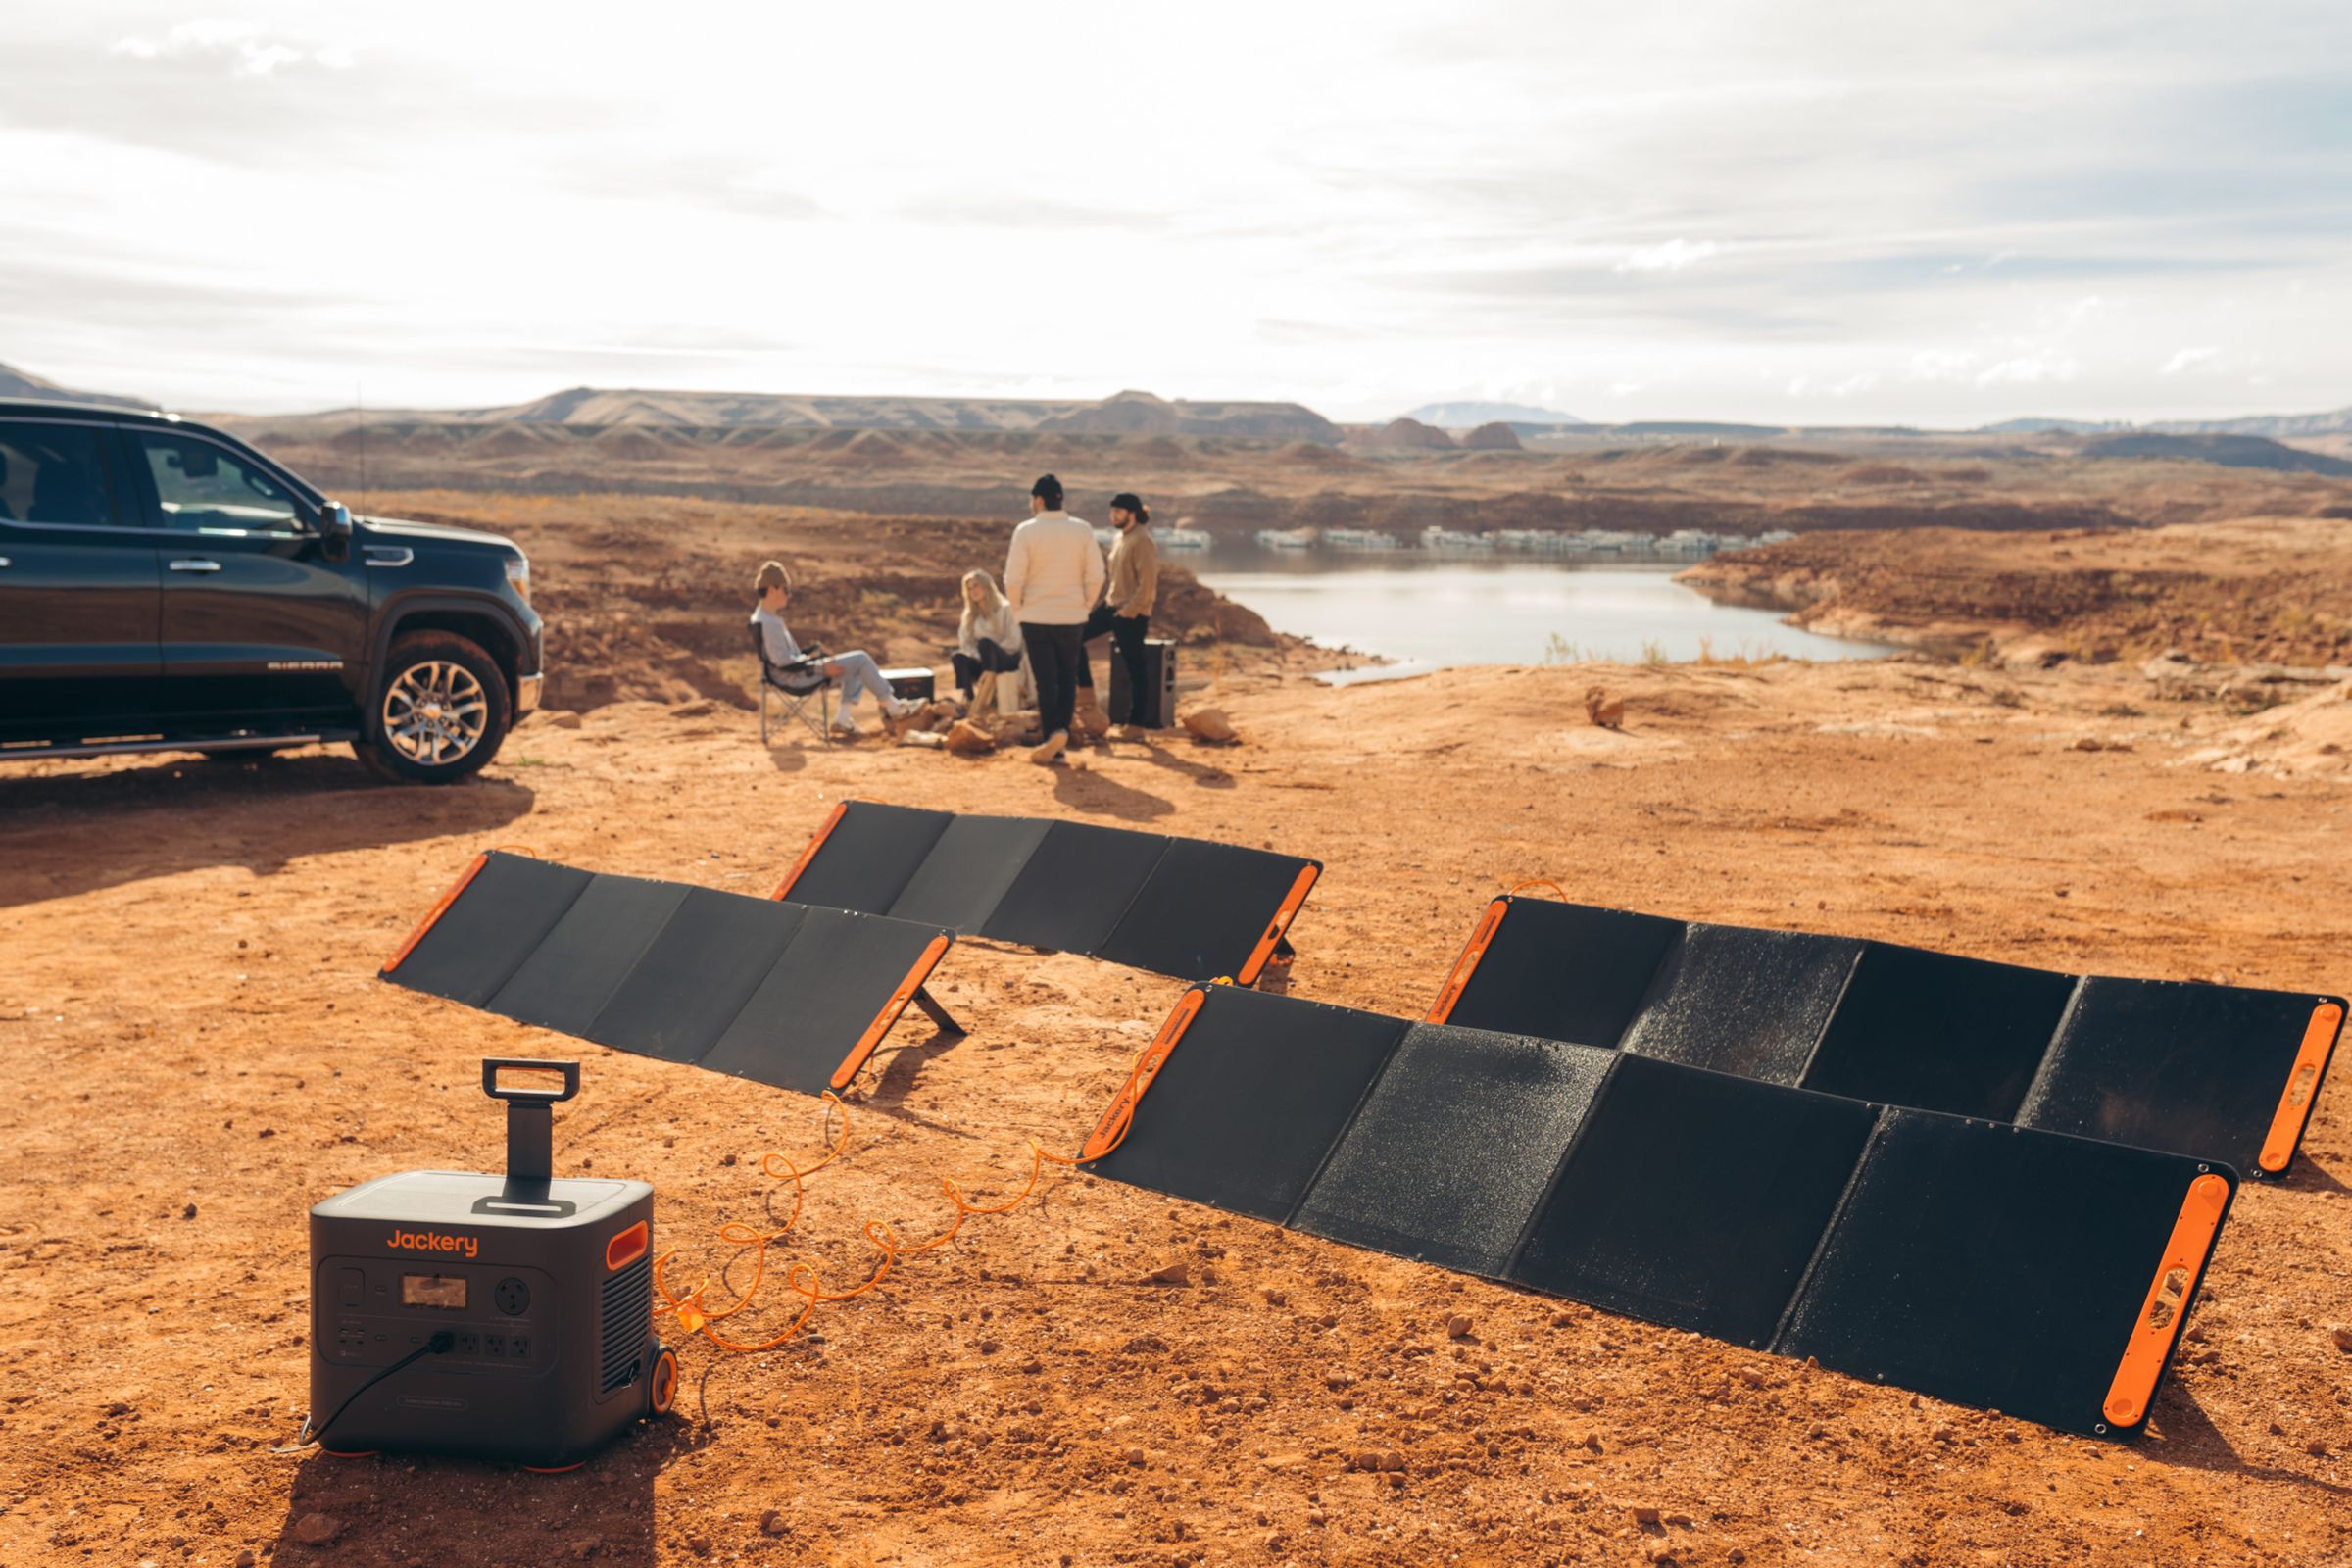 You can plug up to six solar panels into the Jackery Explorer 3000 Pro to fully charge the battery in less than four hours if conditions are perfect (and they never are).